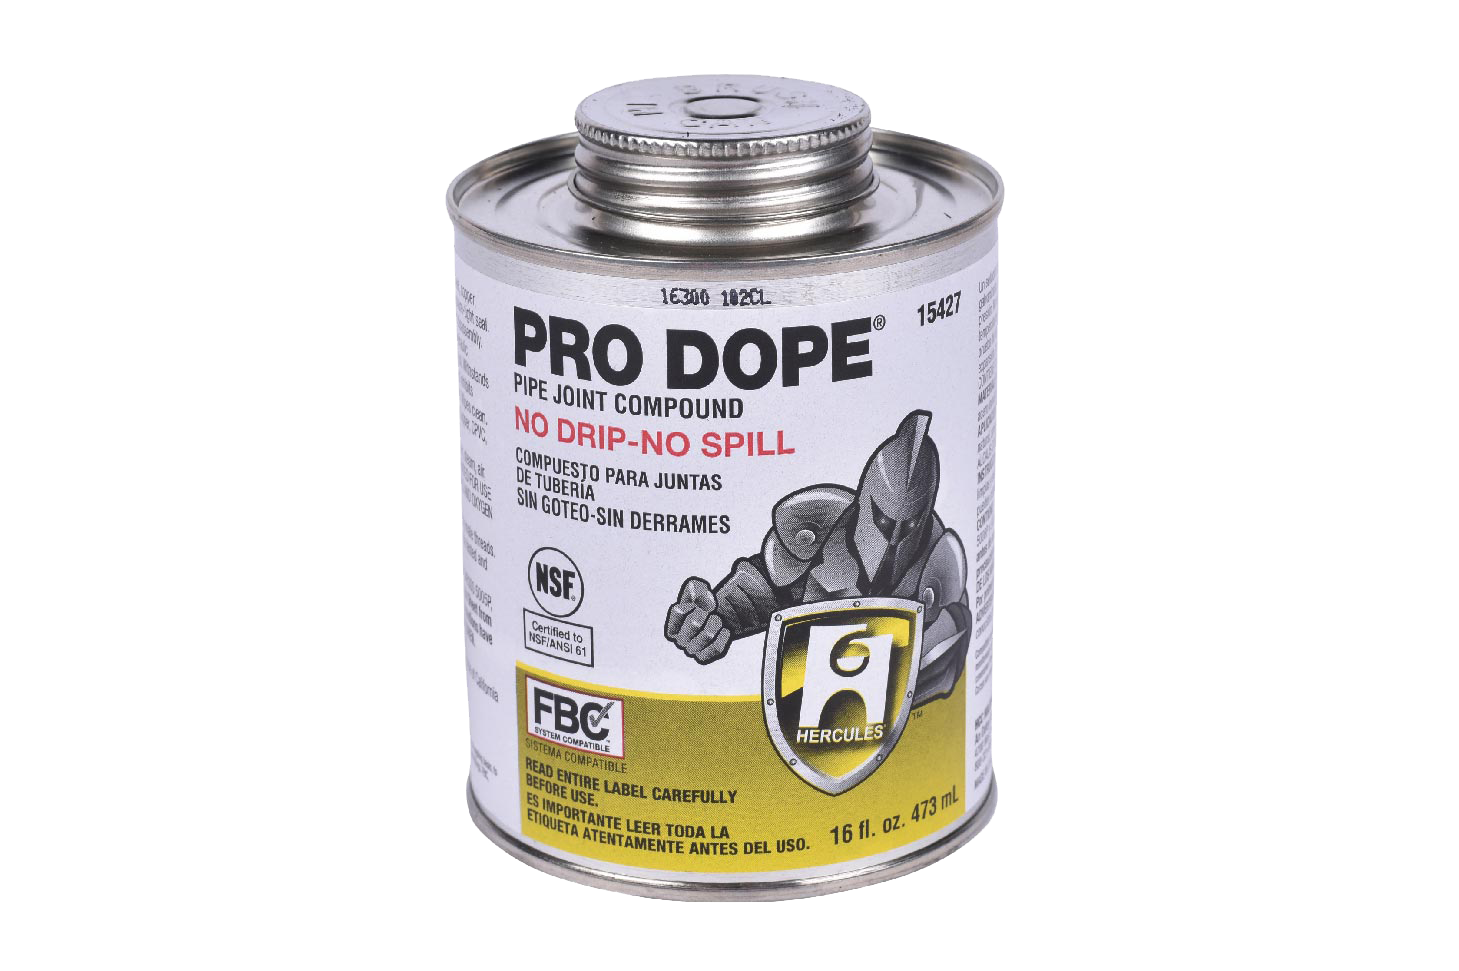 Can of Hercules Pro Dope Pipe Dope